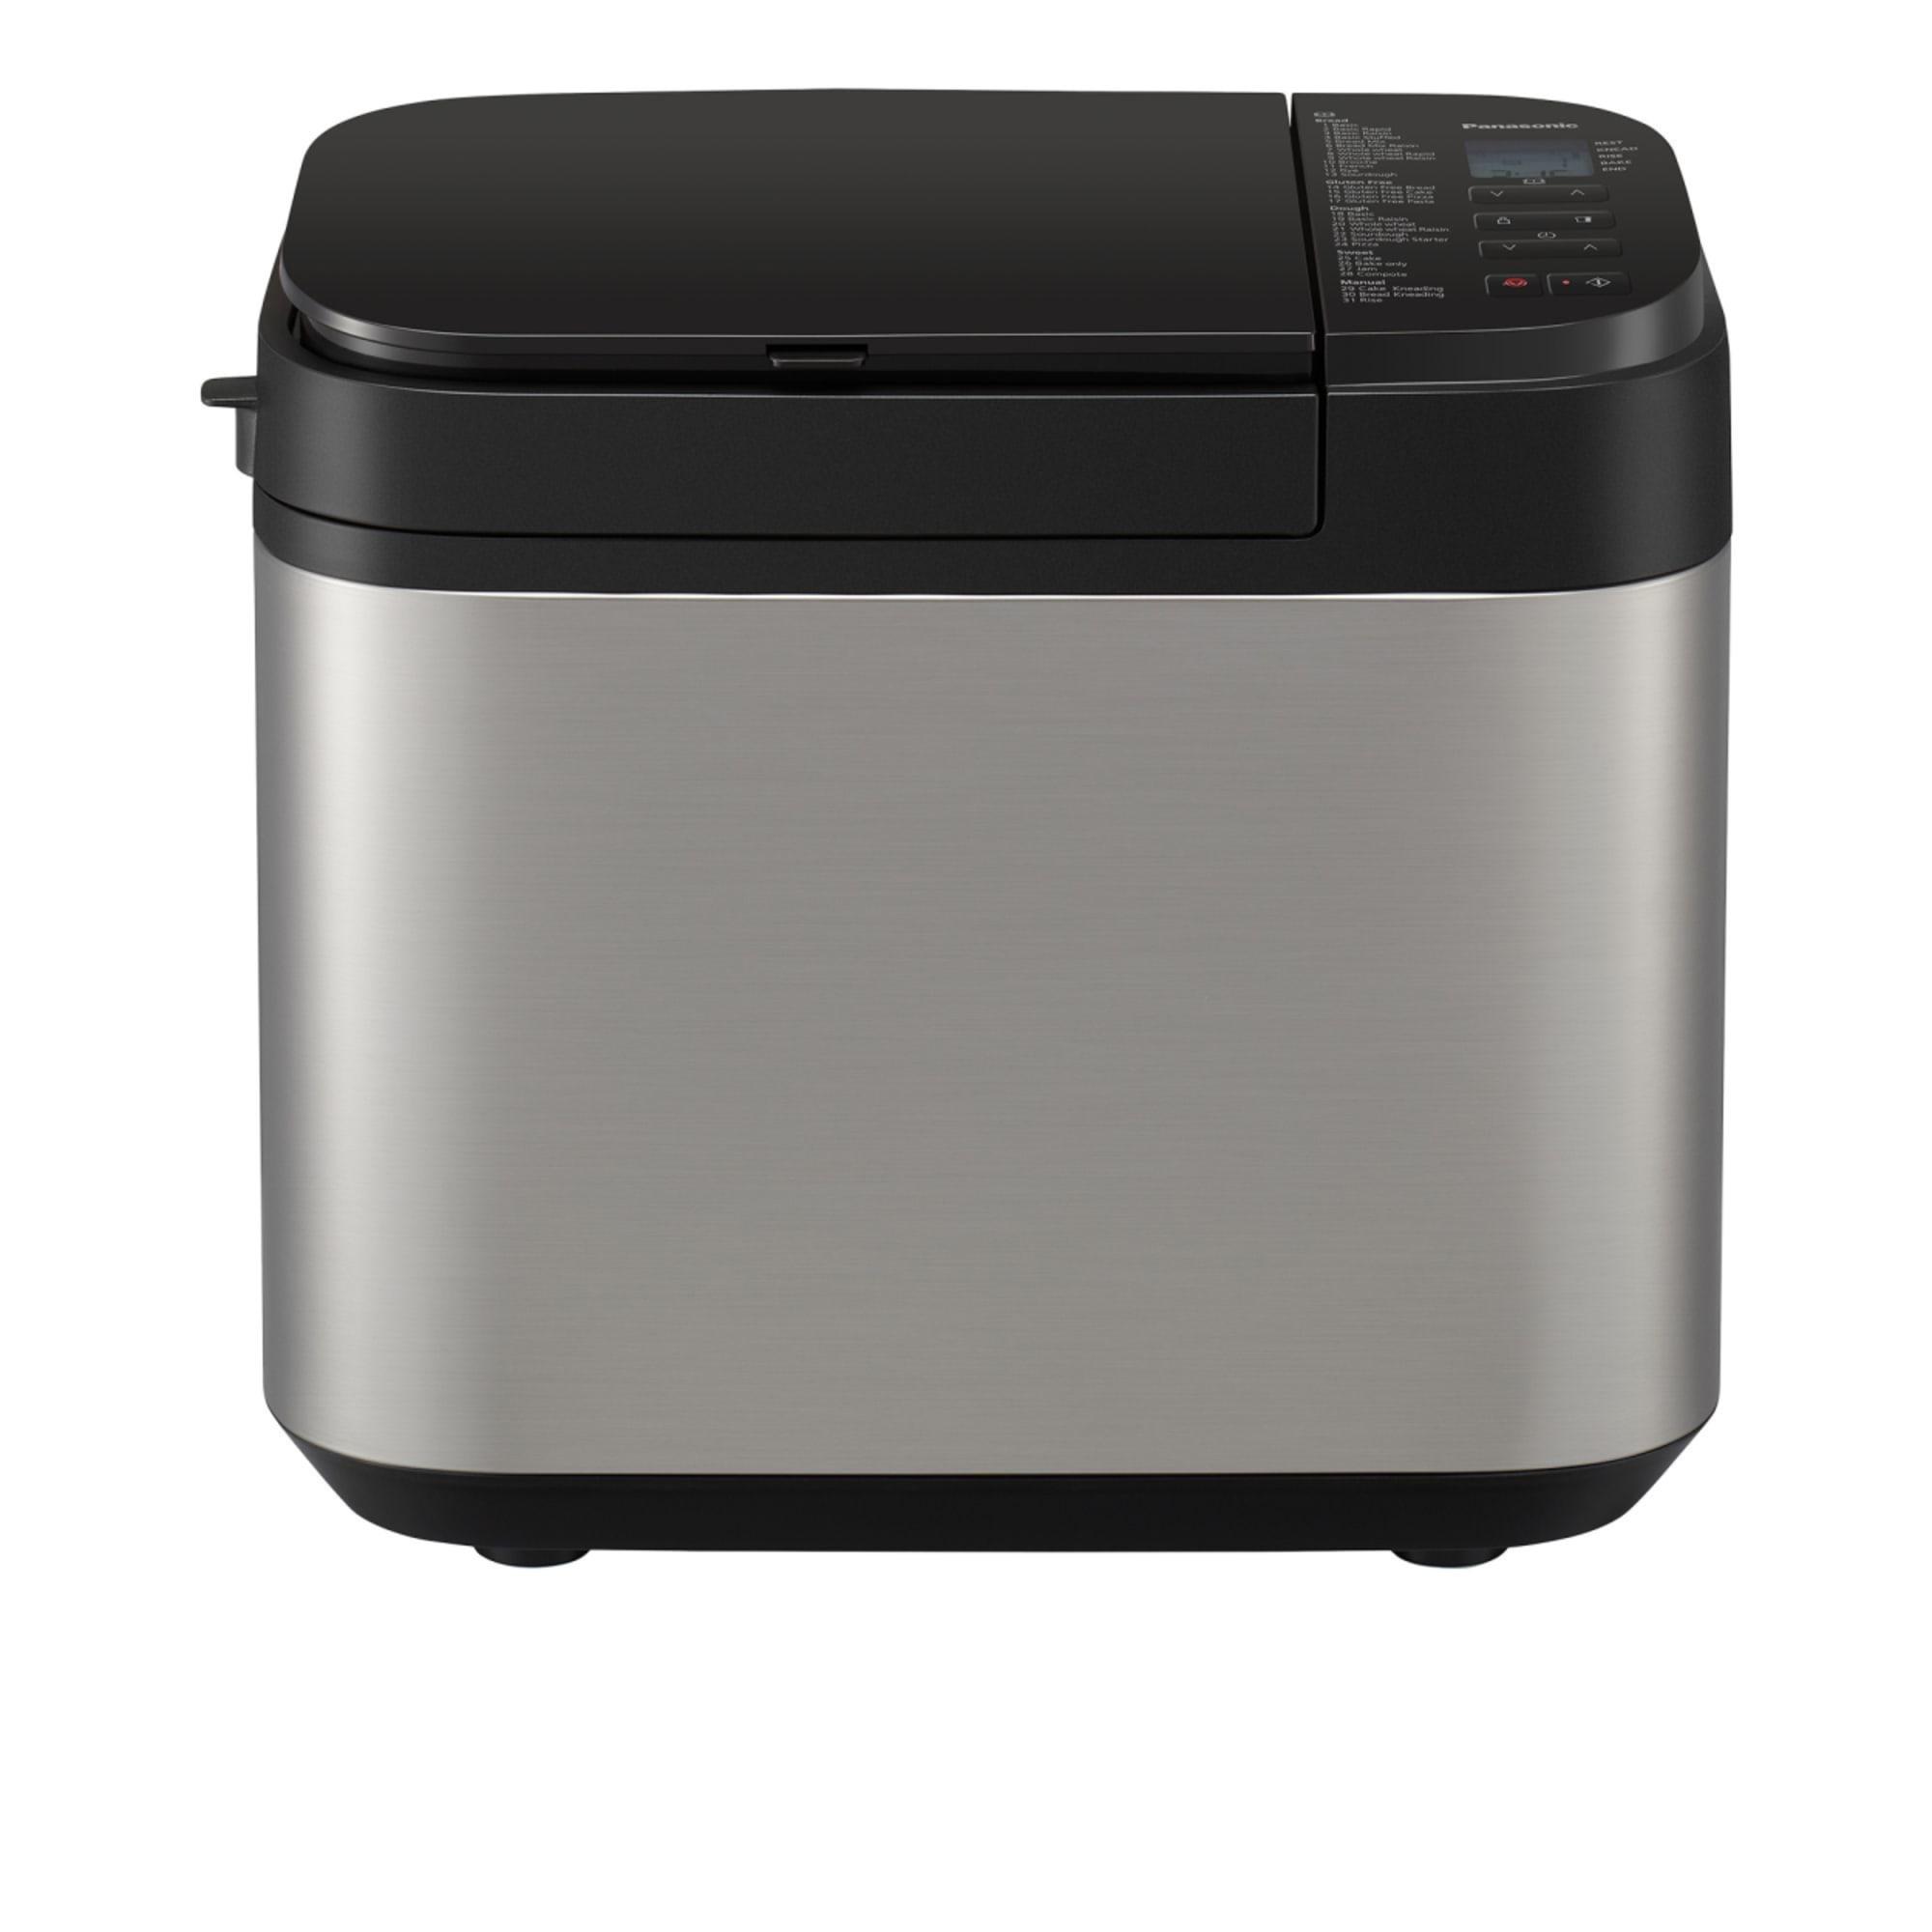 Panasonic Bread Maker with Dual Dispenser Stainless Steel Image 8